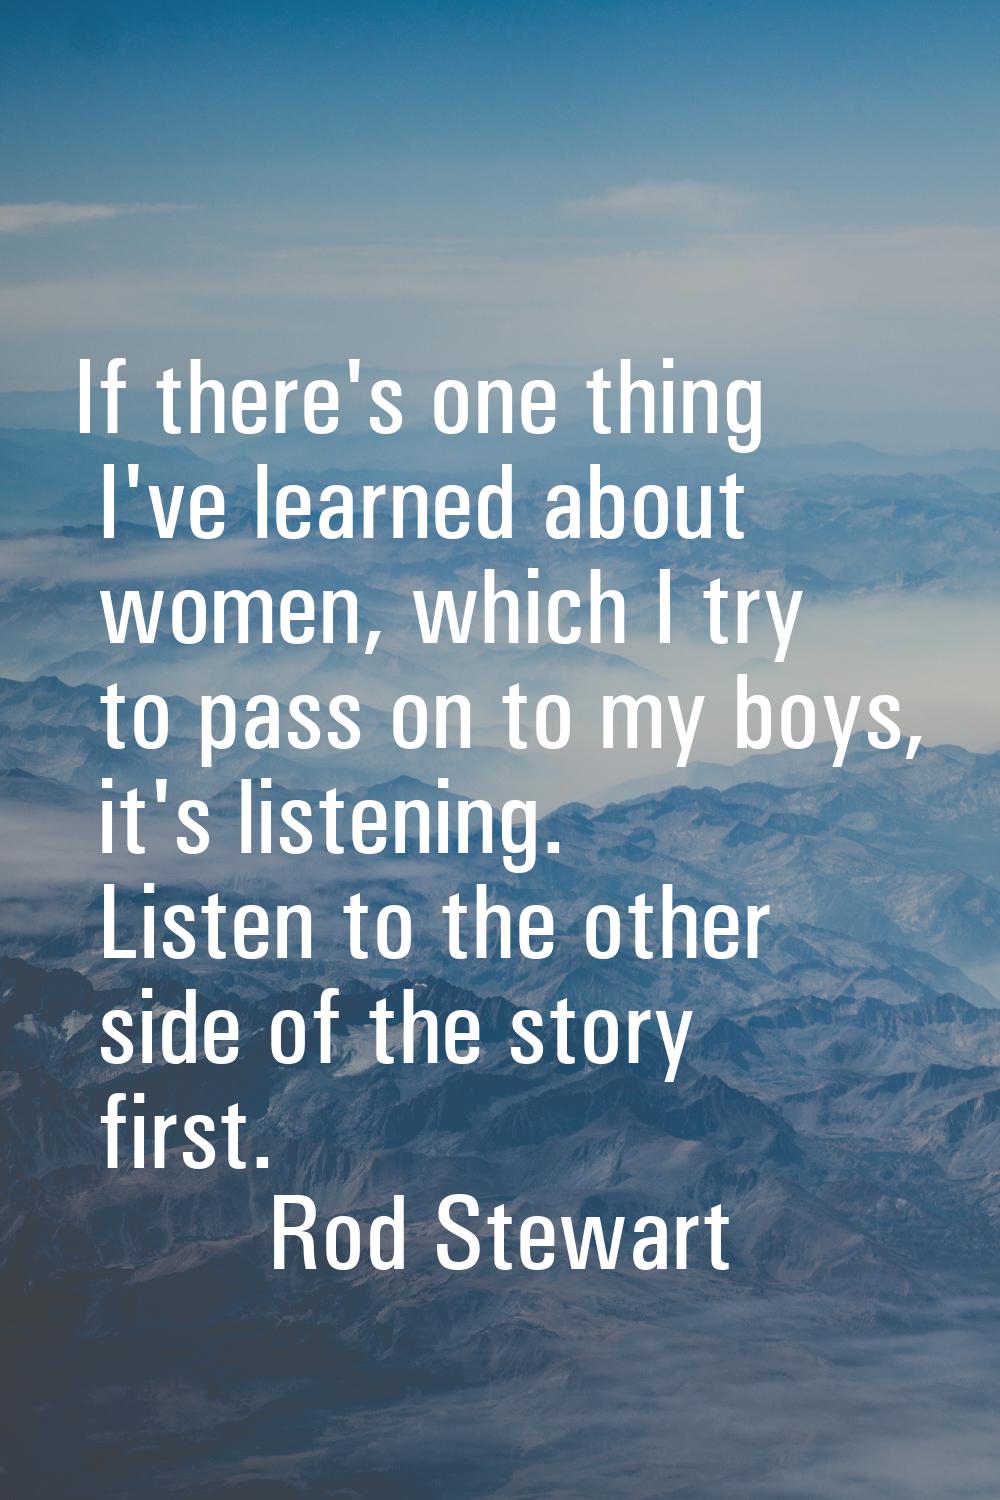 If there's one thing I've learned about women, which I try to pass on to my boys, it's listening. L